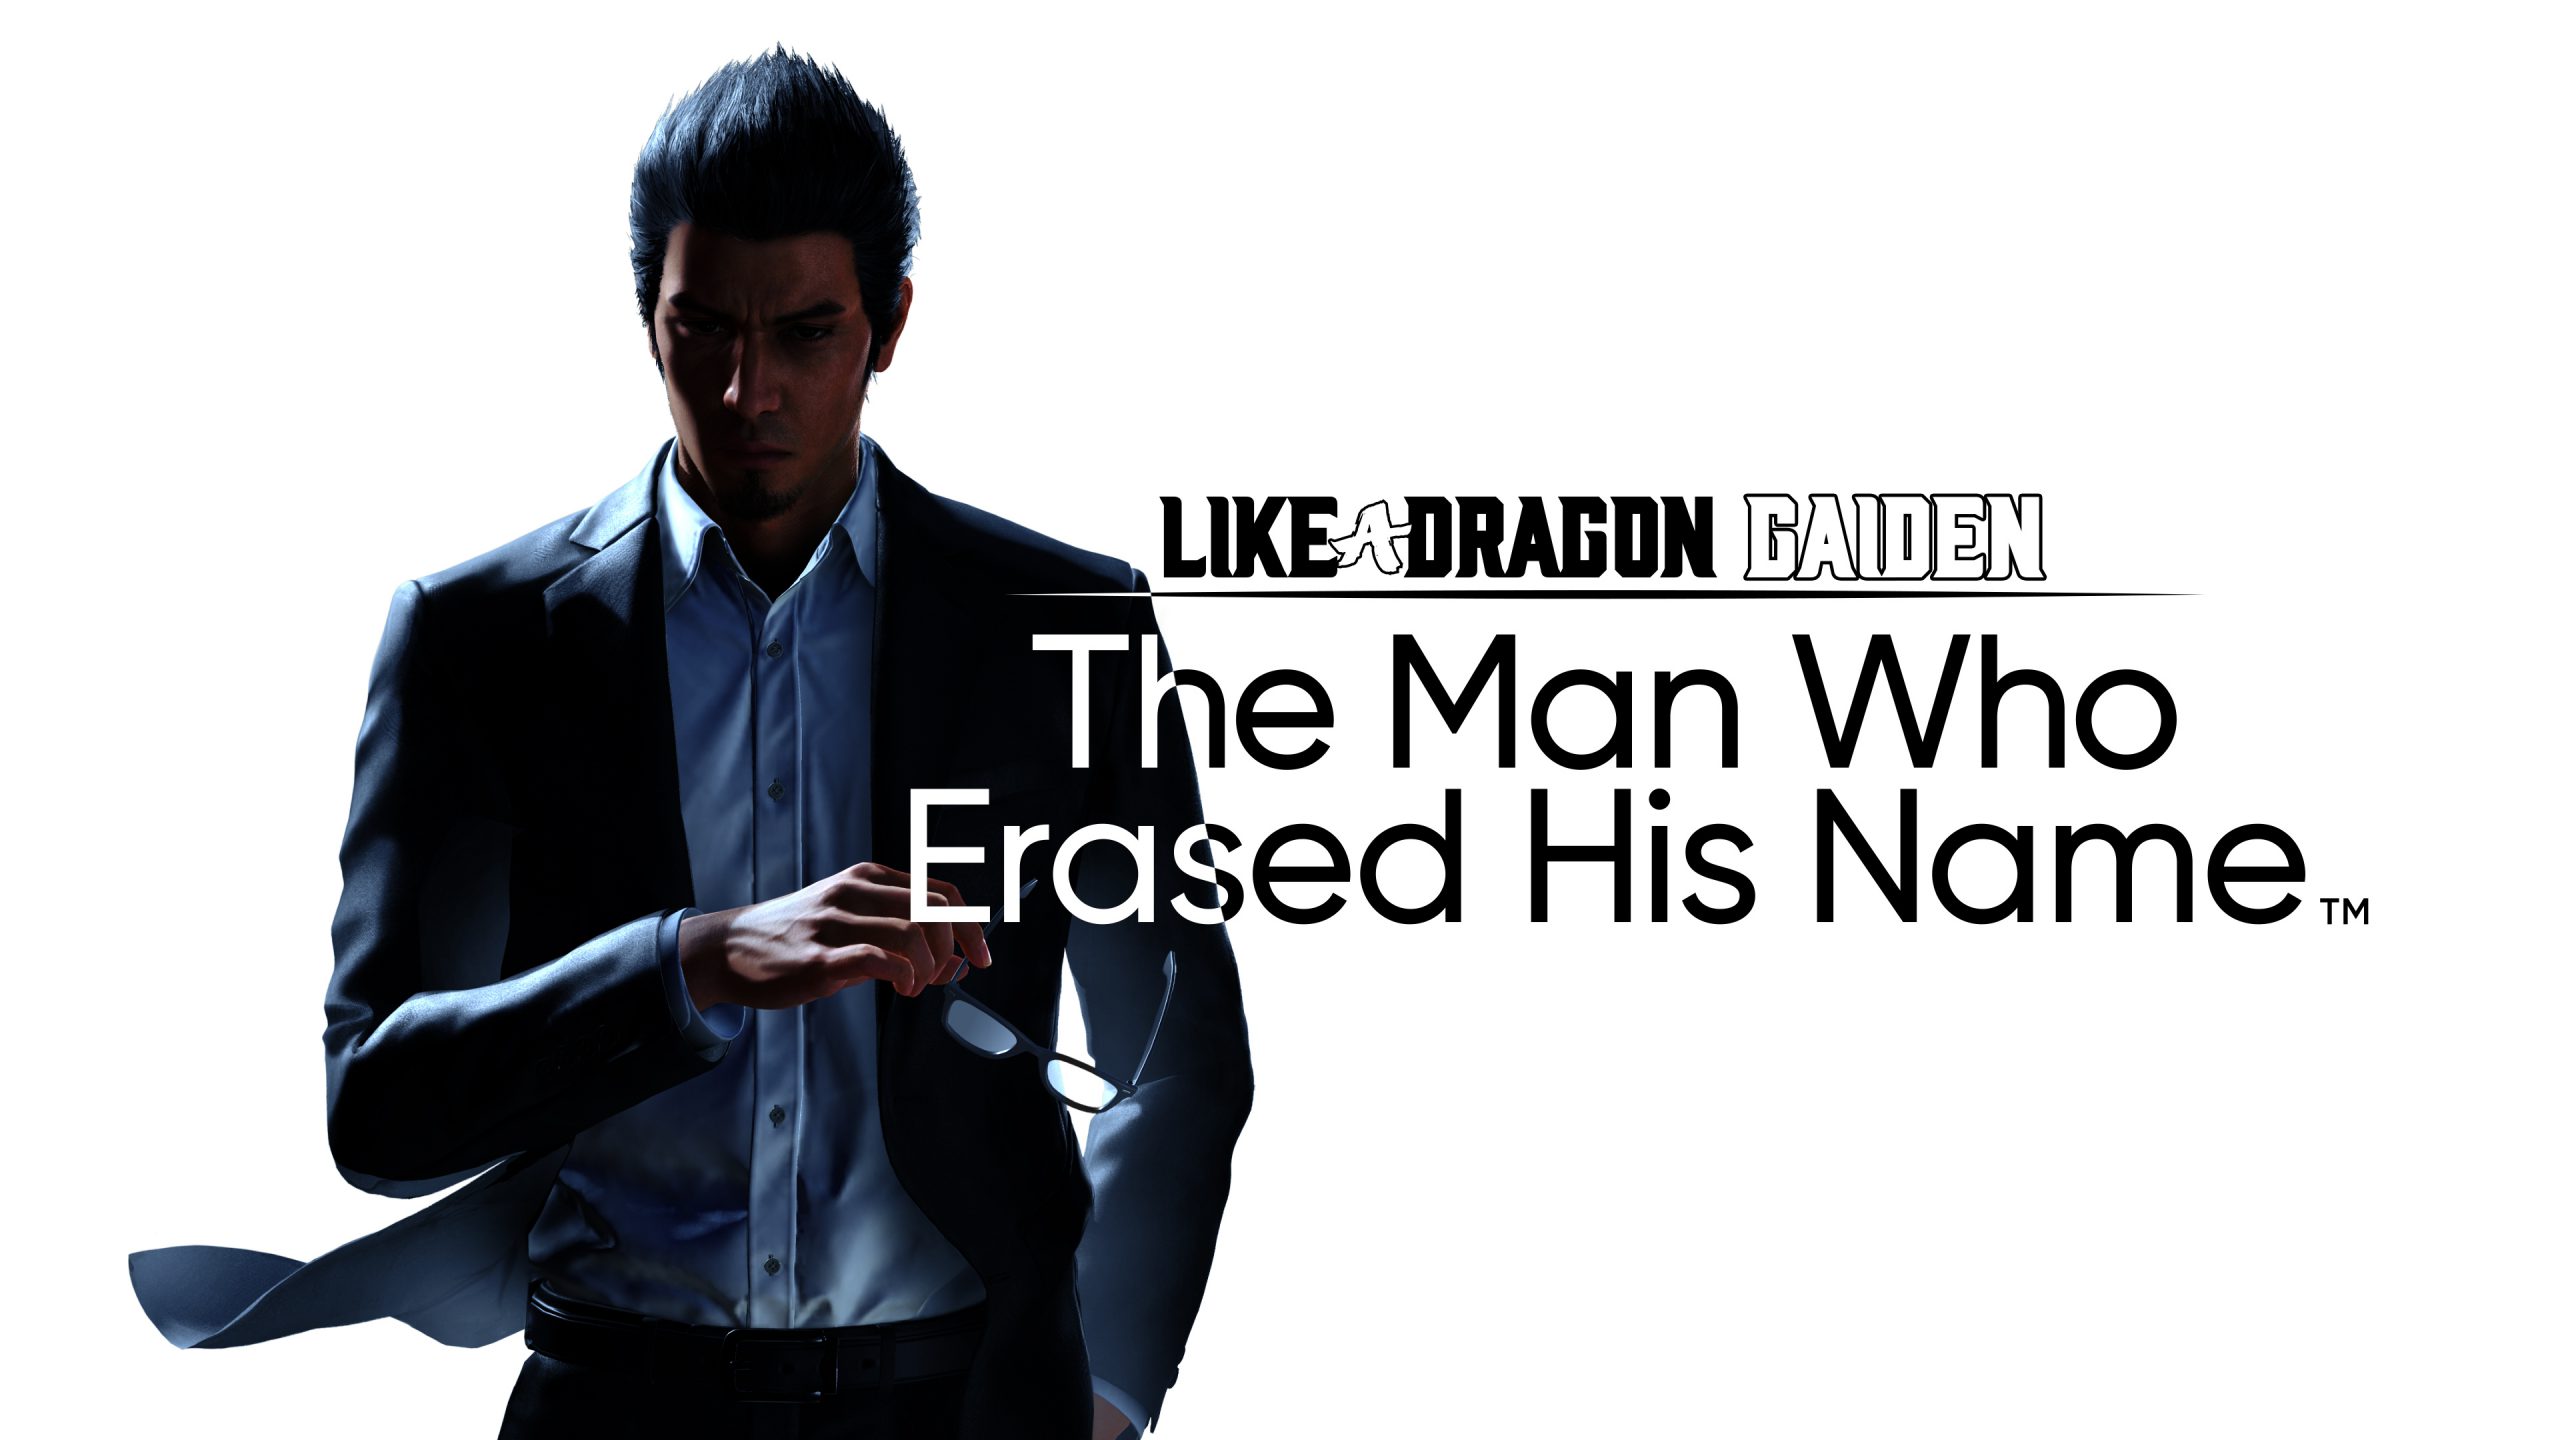 Like a Dragon Gaiden: The Man Who Erased His Name – PREVIEW